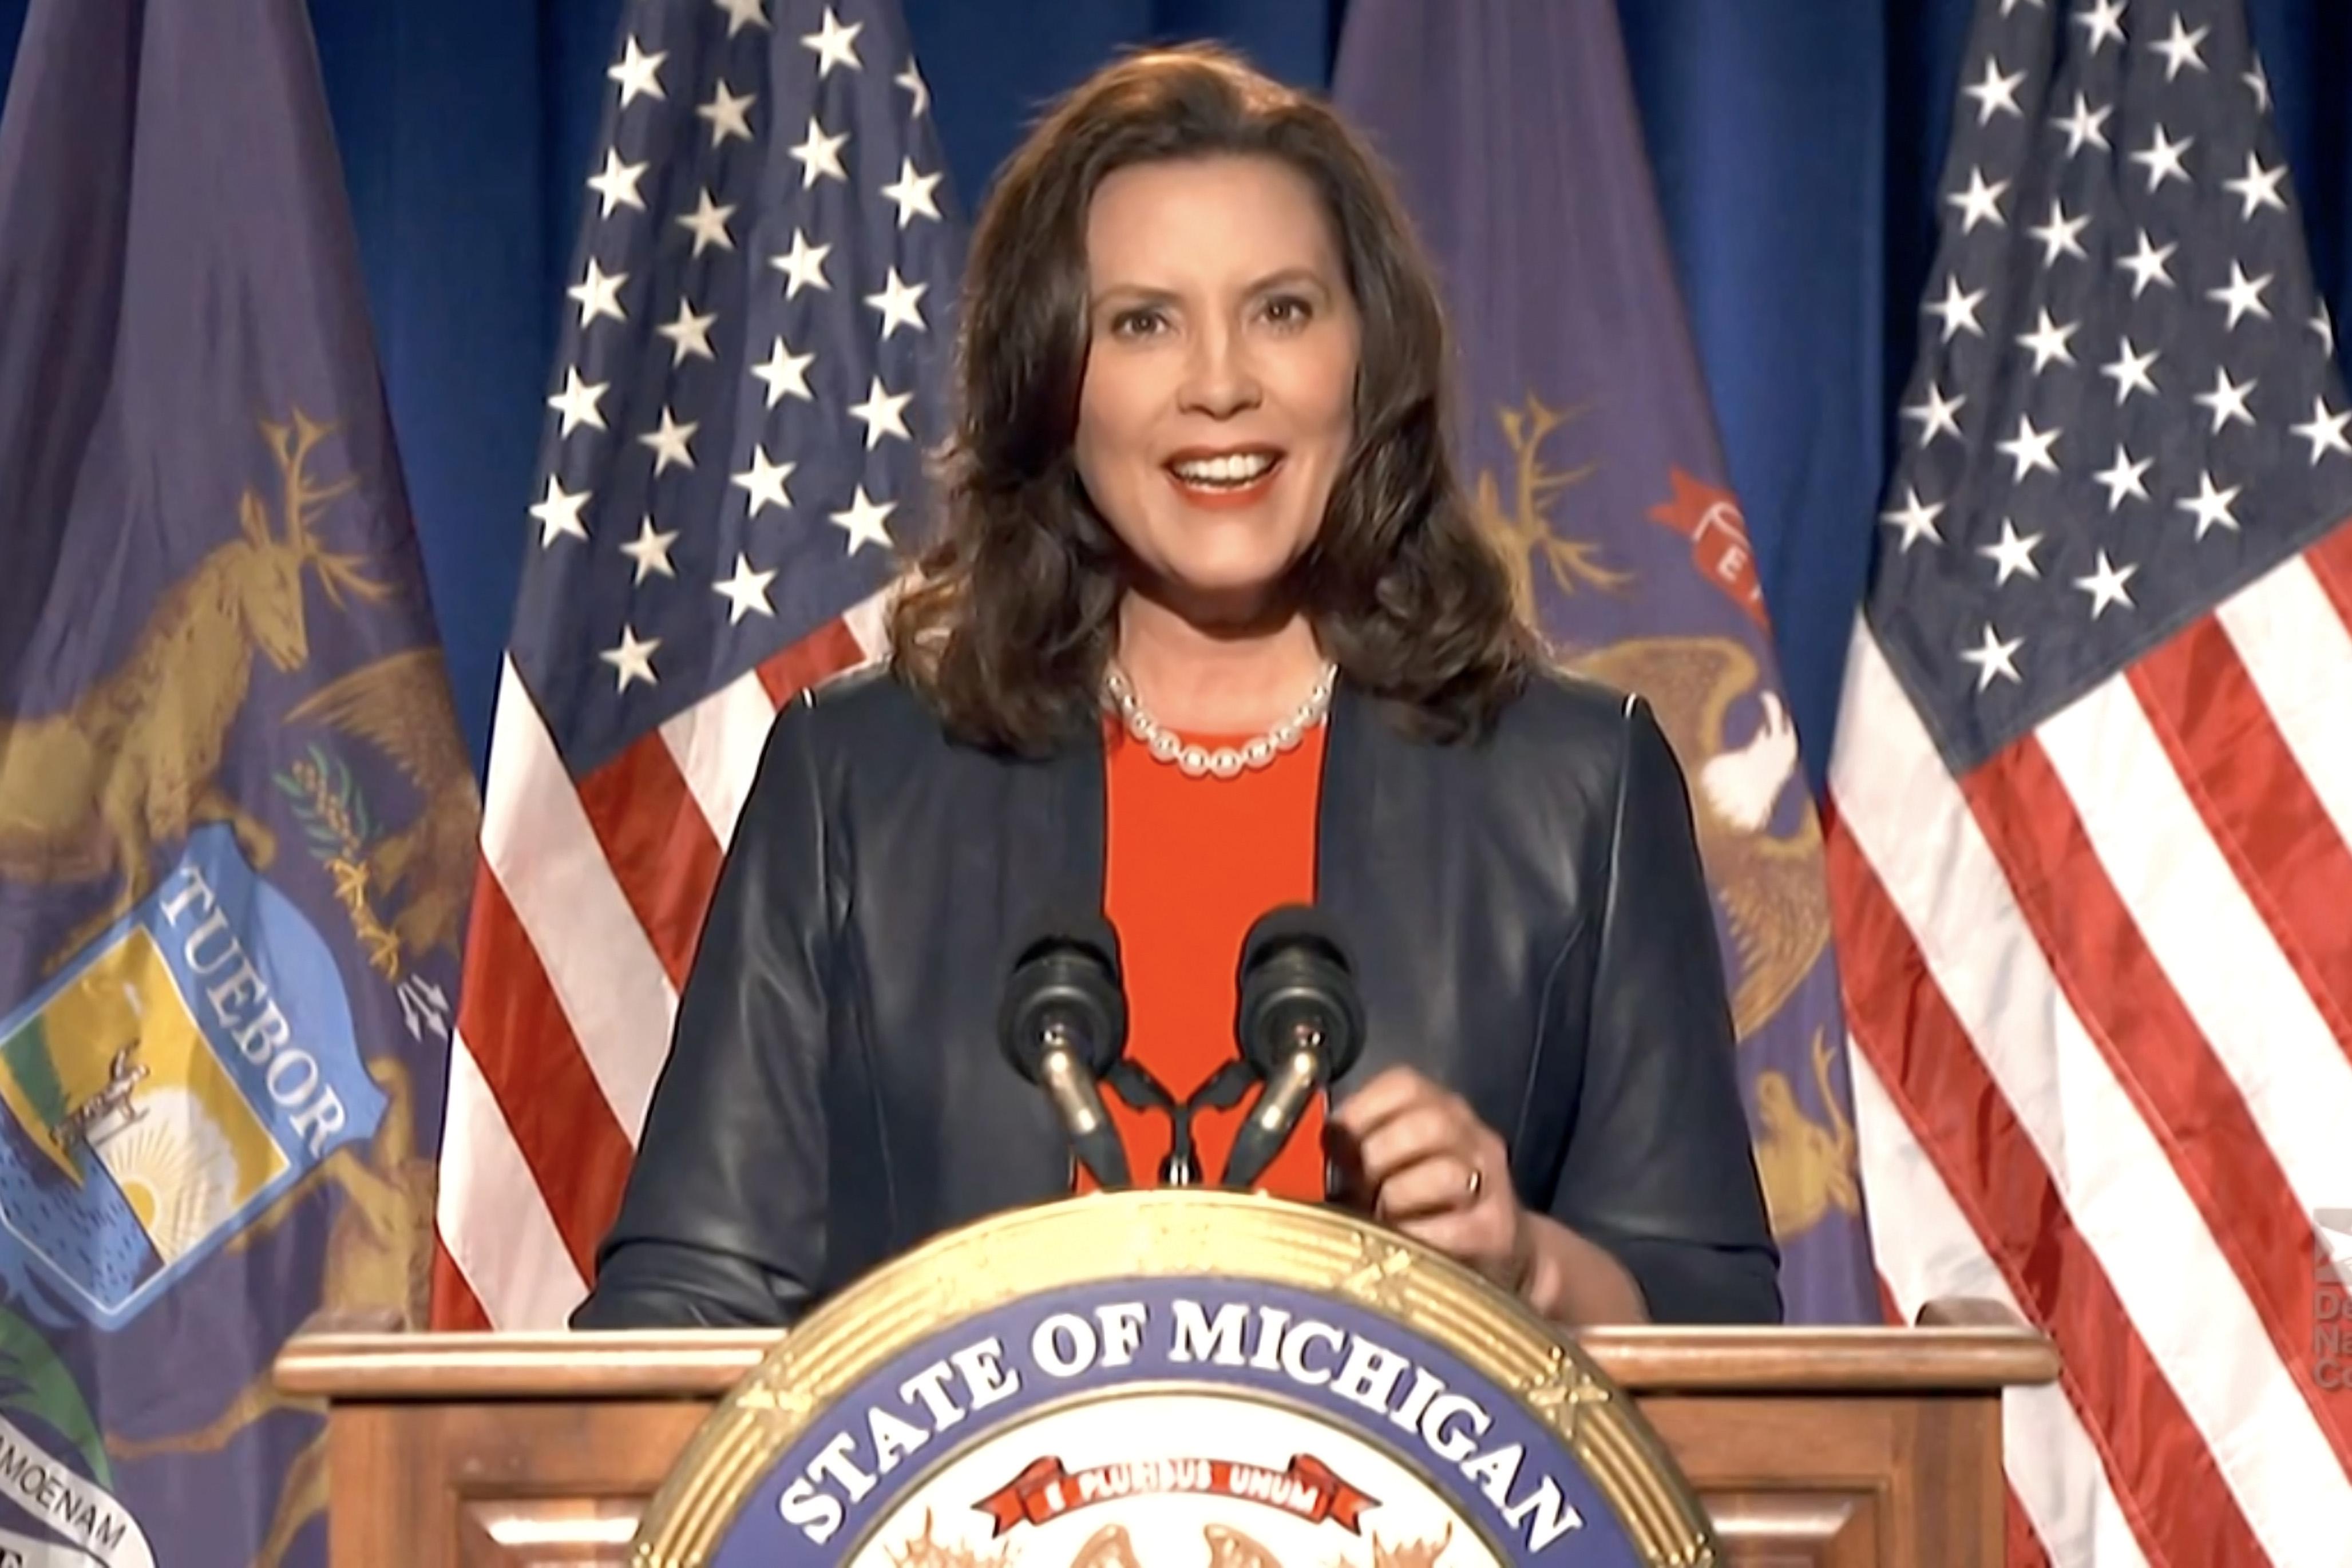 Whitmer, seen in a leather jacket, speaks at a podium bearing a Michigan seal.